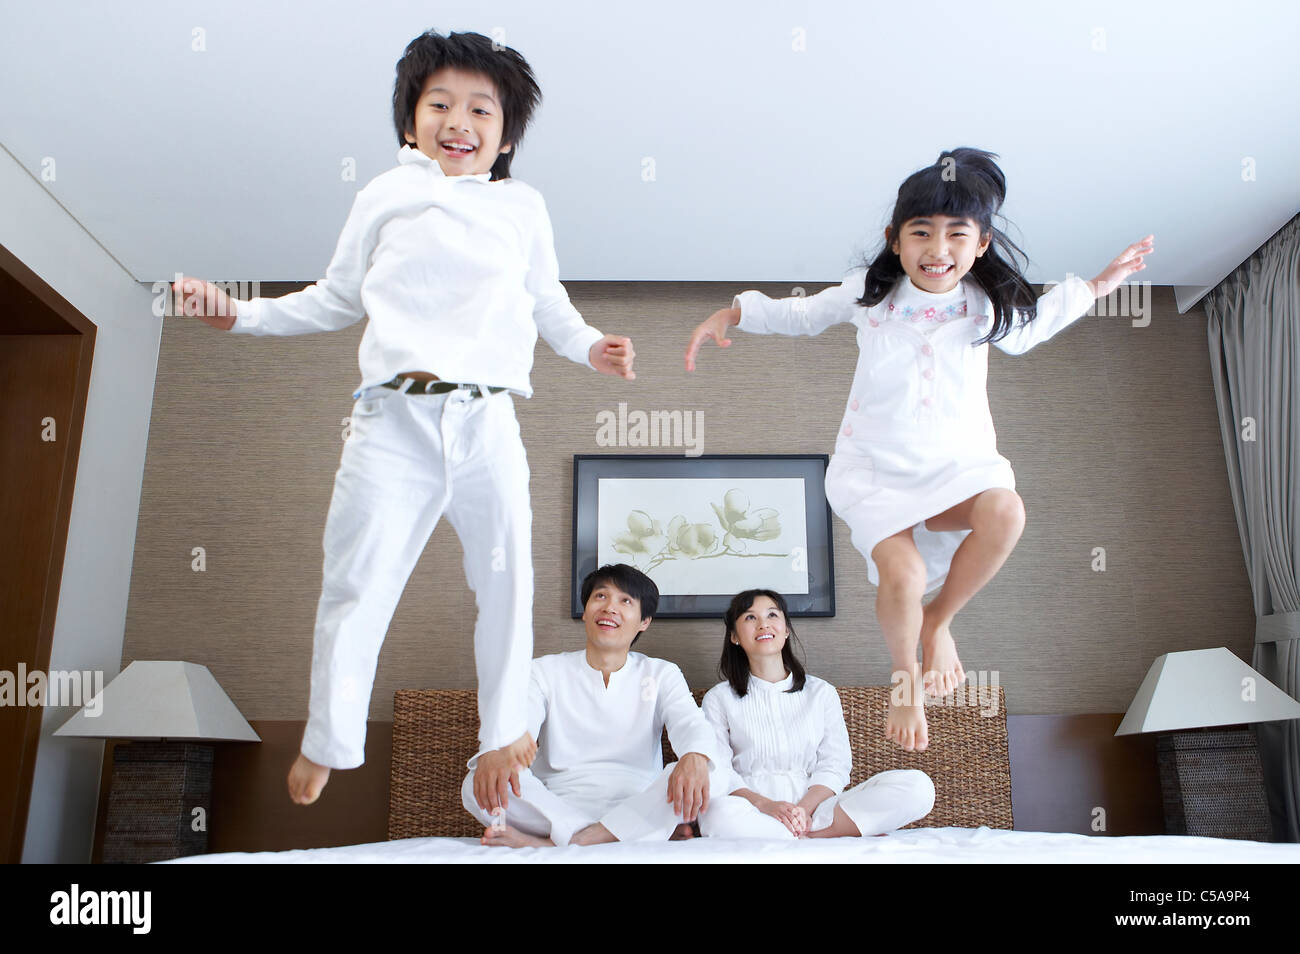 Portrait of children jumping on bed, while parents looking Stock Photo